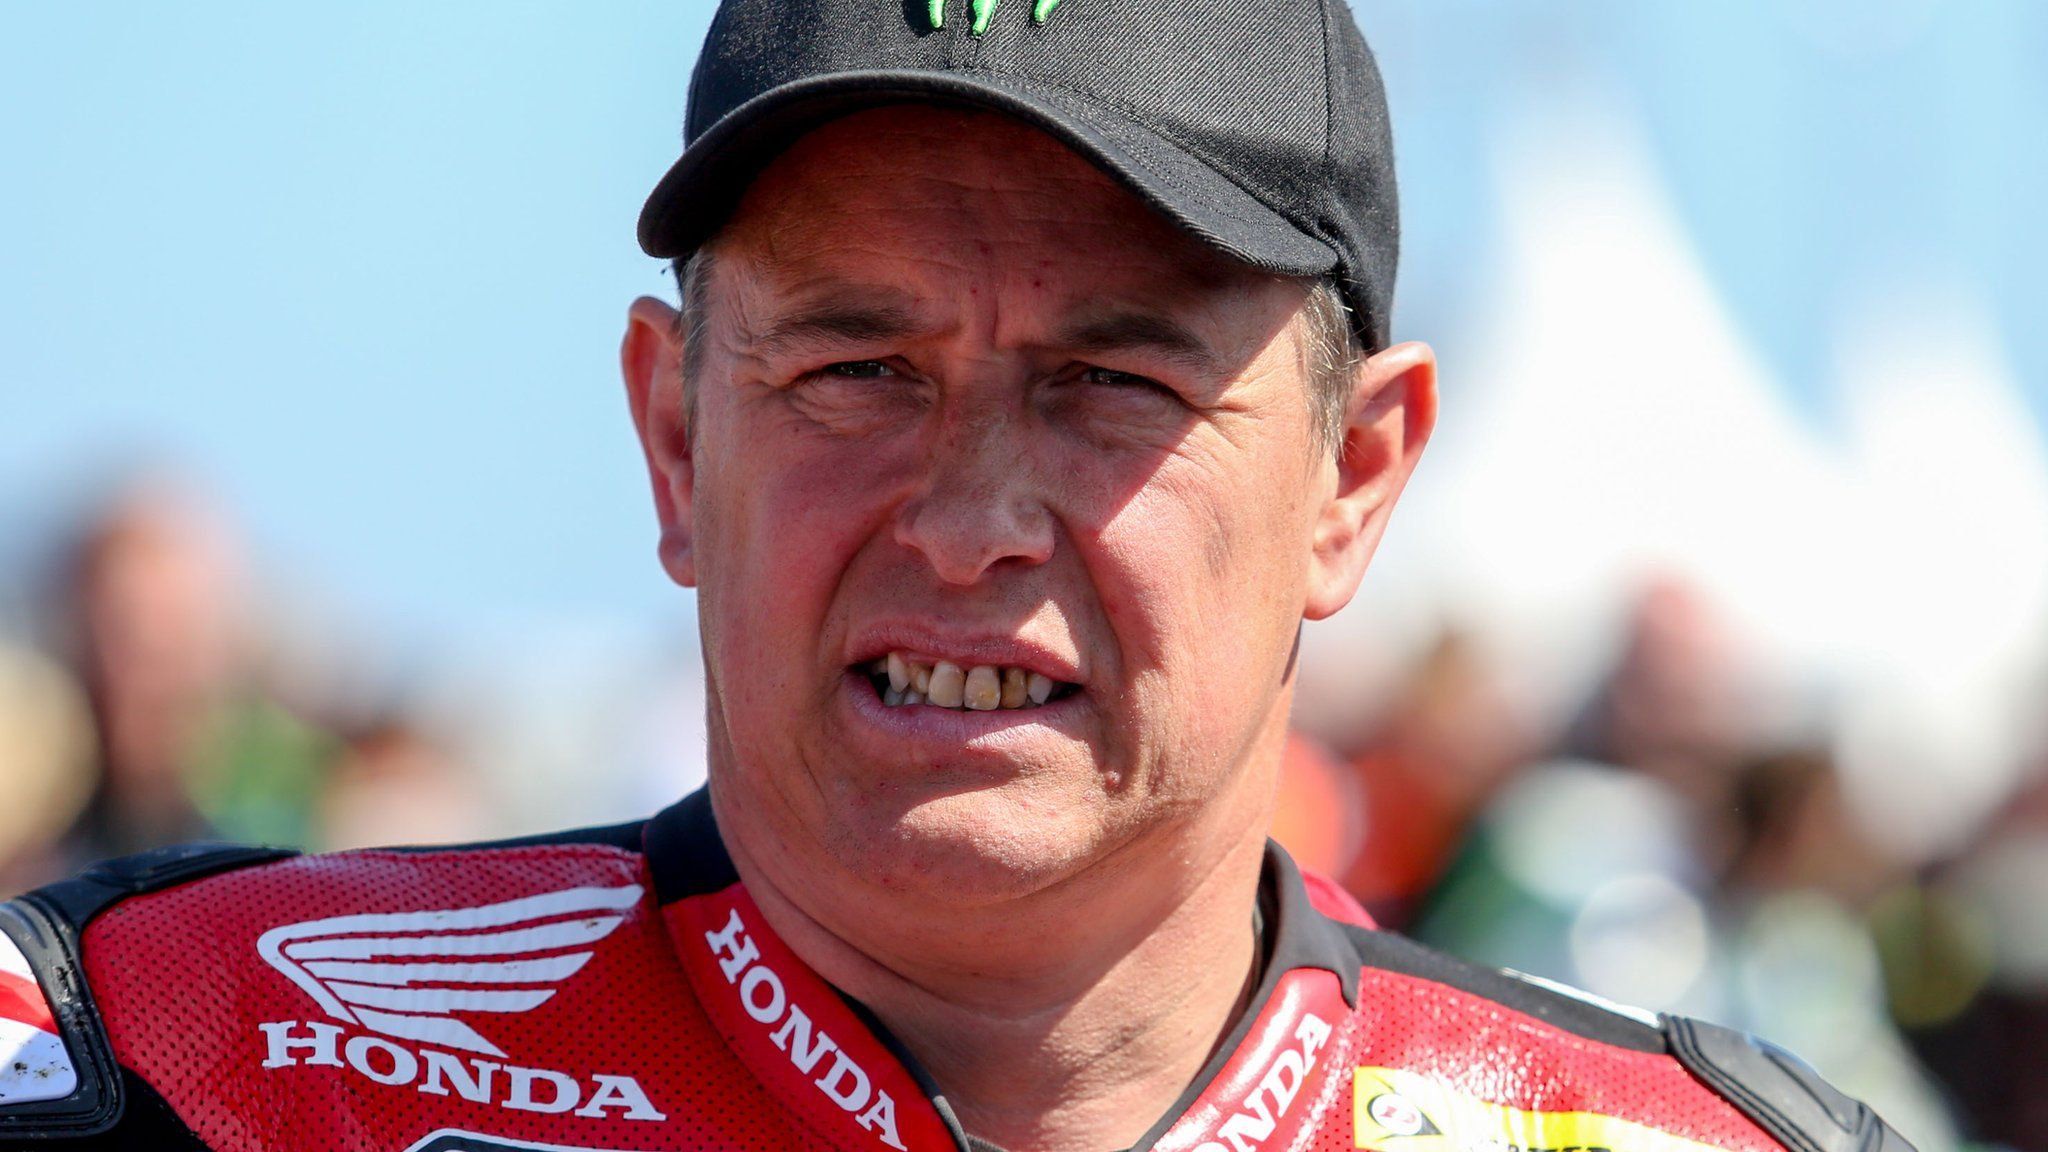 John McGuinness crashed in Thursday's practice session at the North West 200